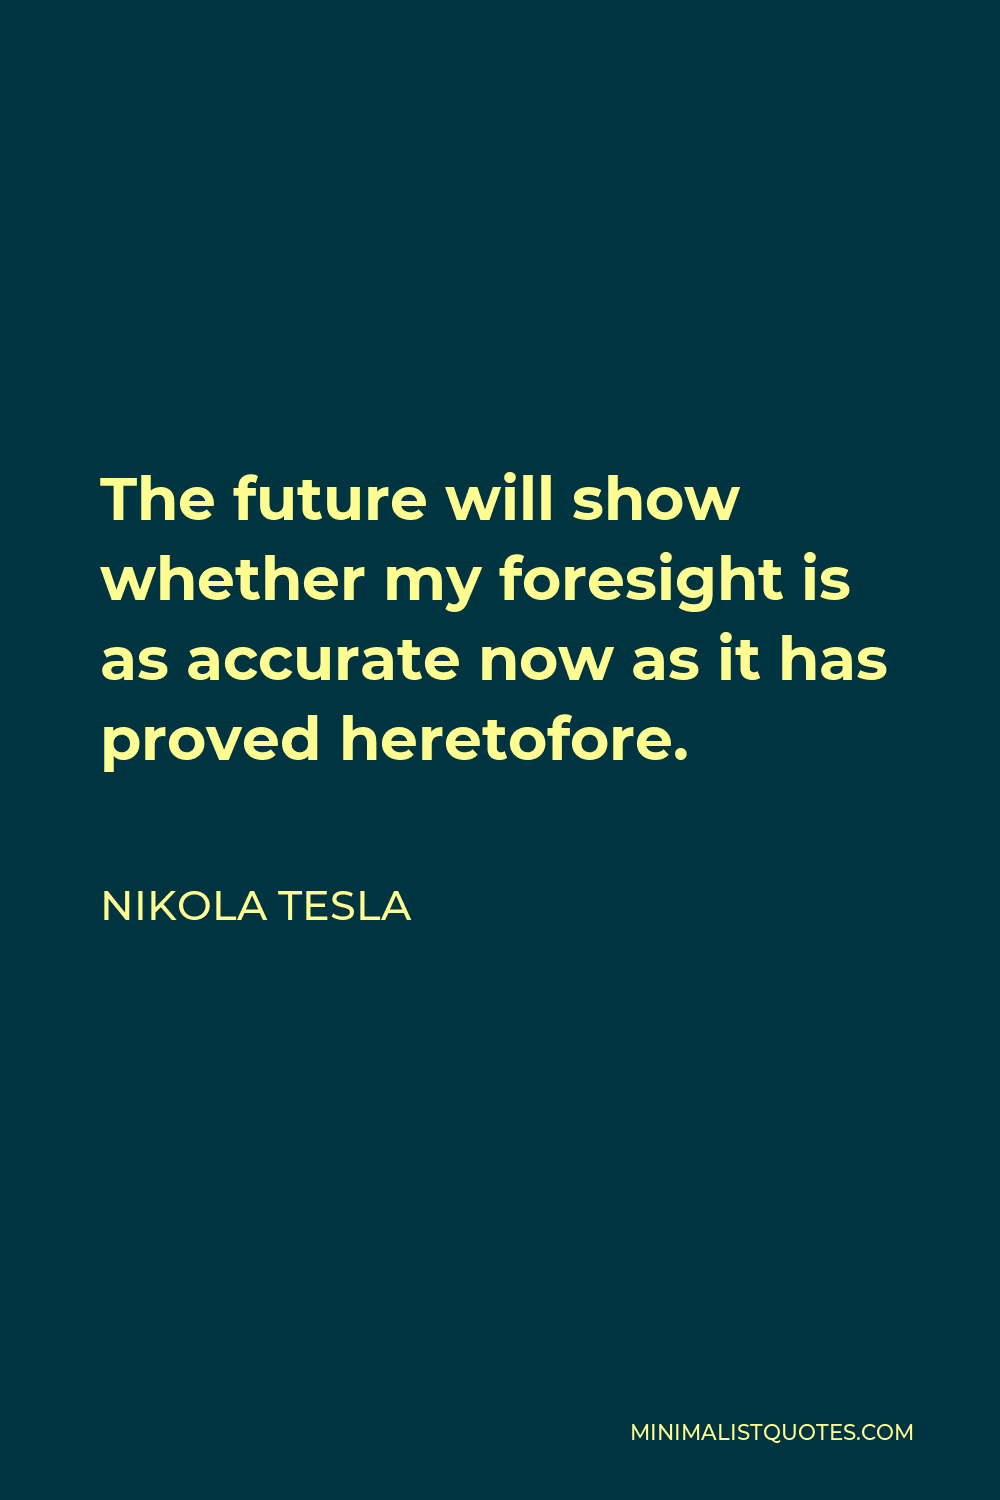 Nikola Tesla Quote - The future will show whether my foresight is as accurate now as it has proved heretofore.